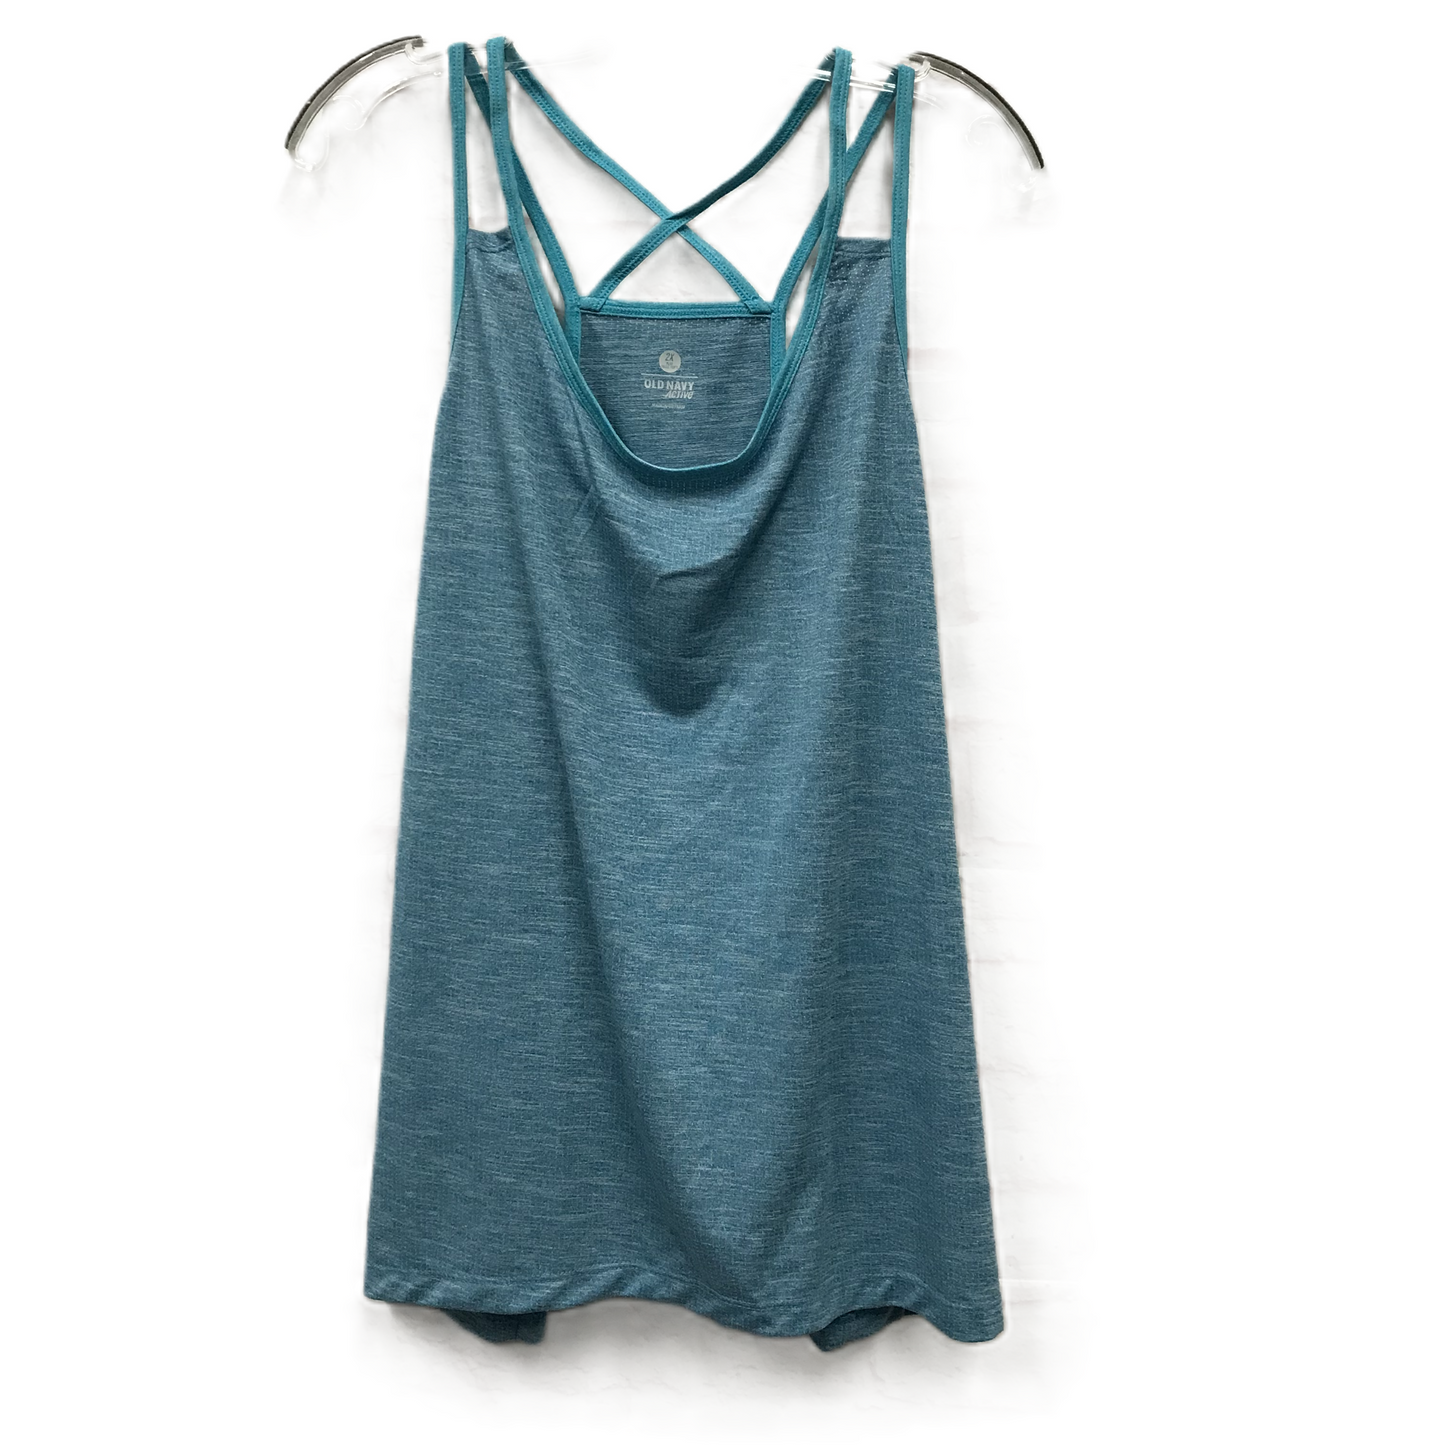 Blue Athletic Tank Top By Old Navy, Size: 2x